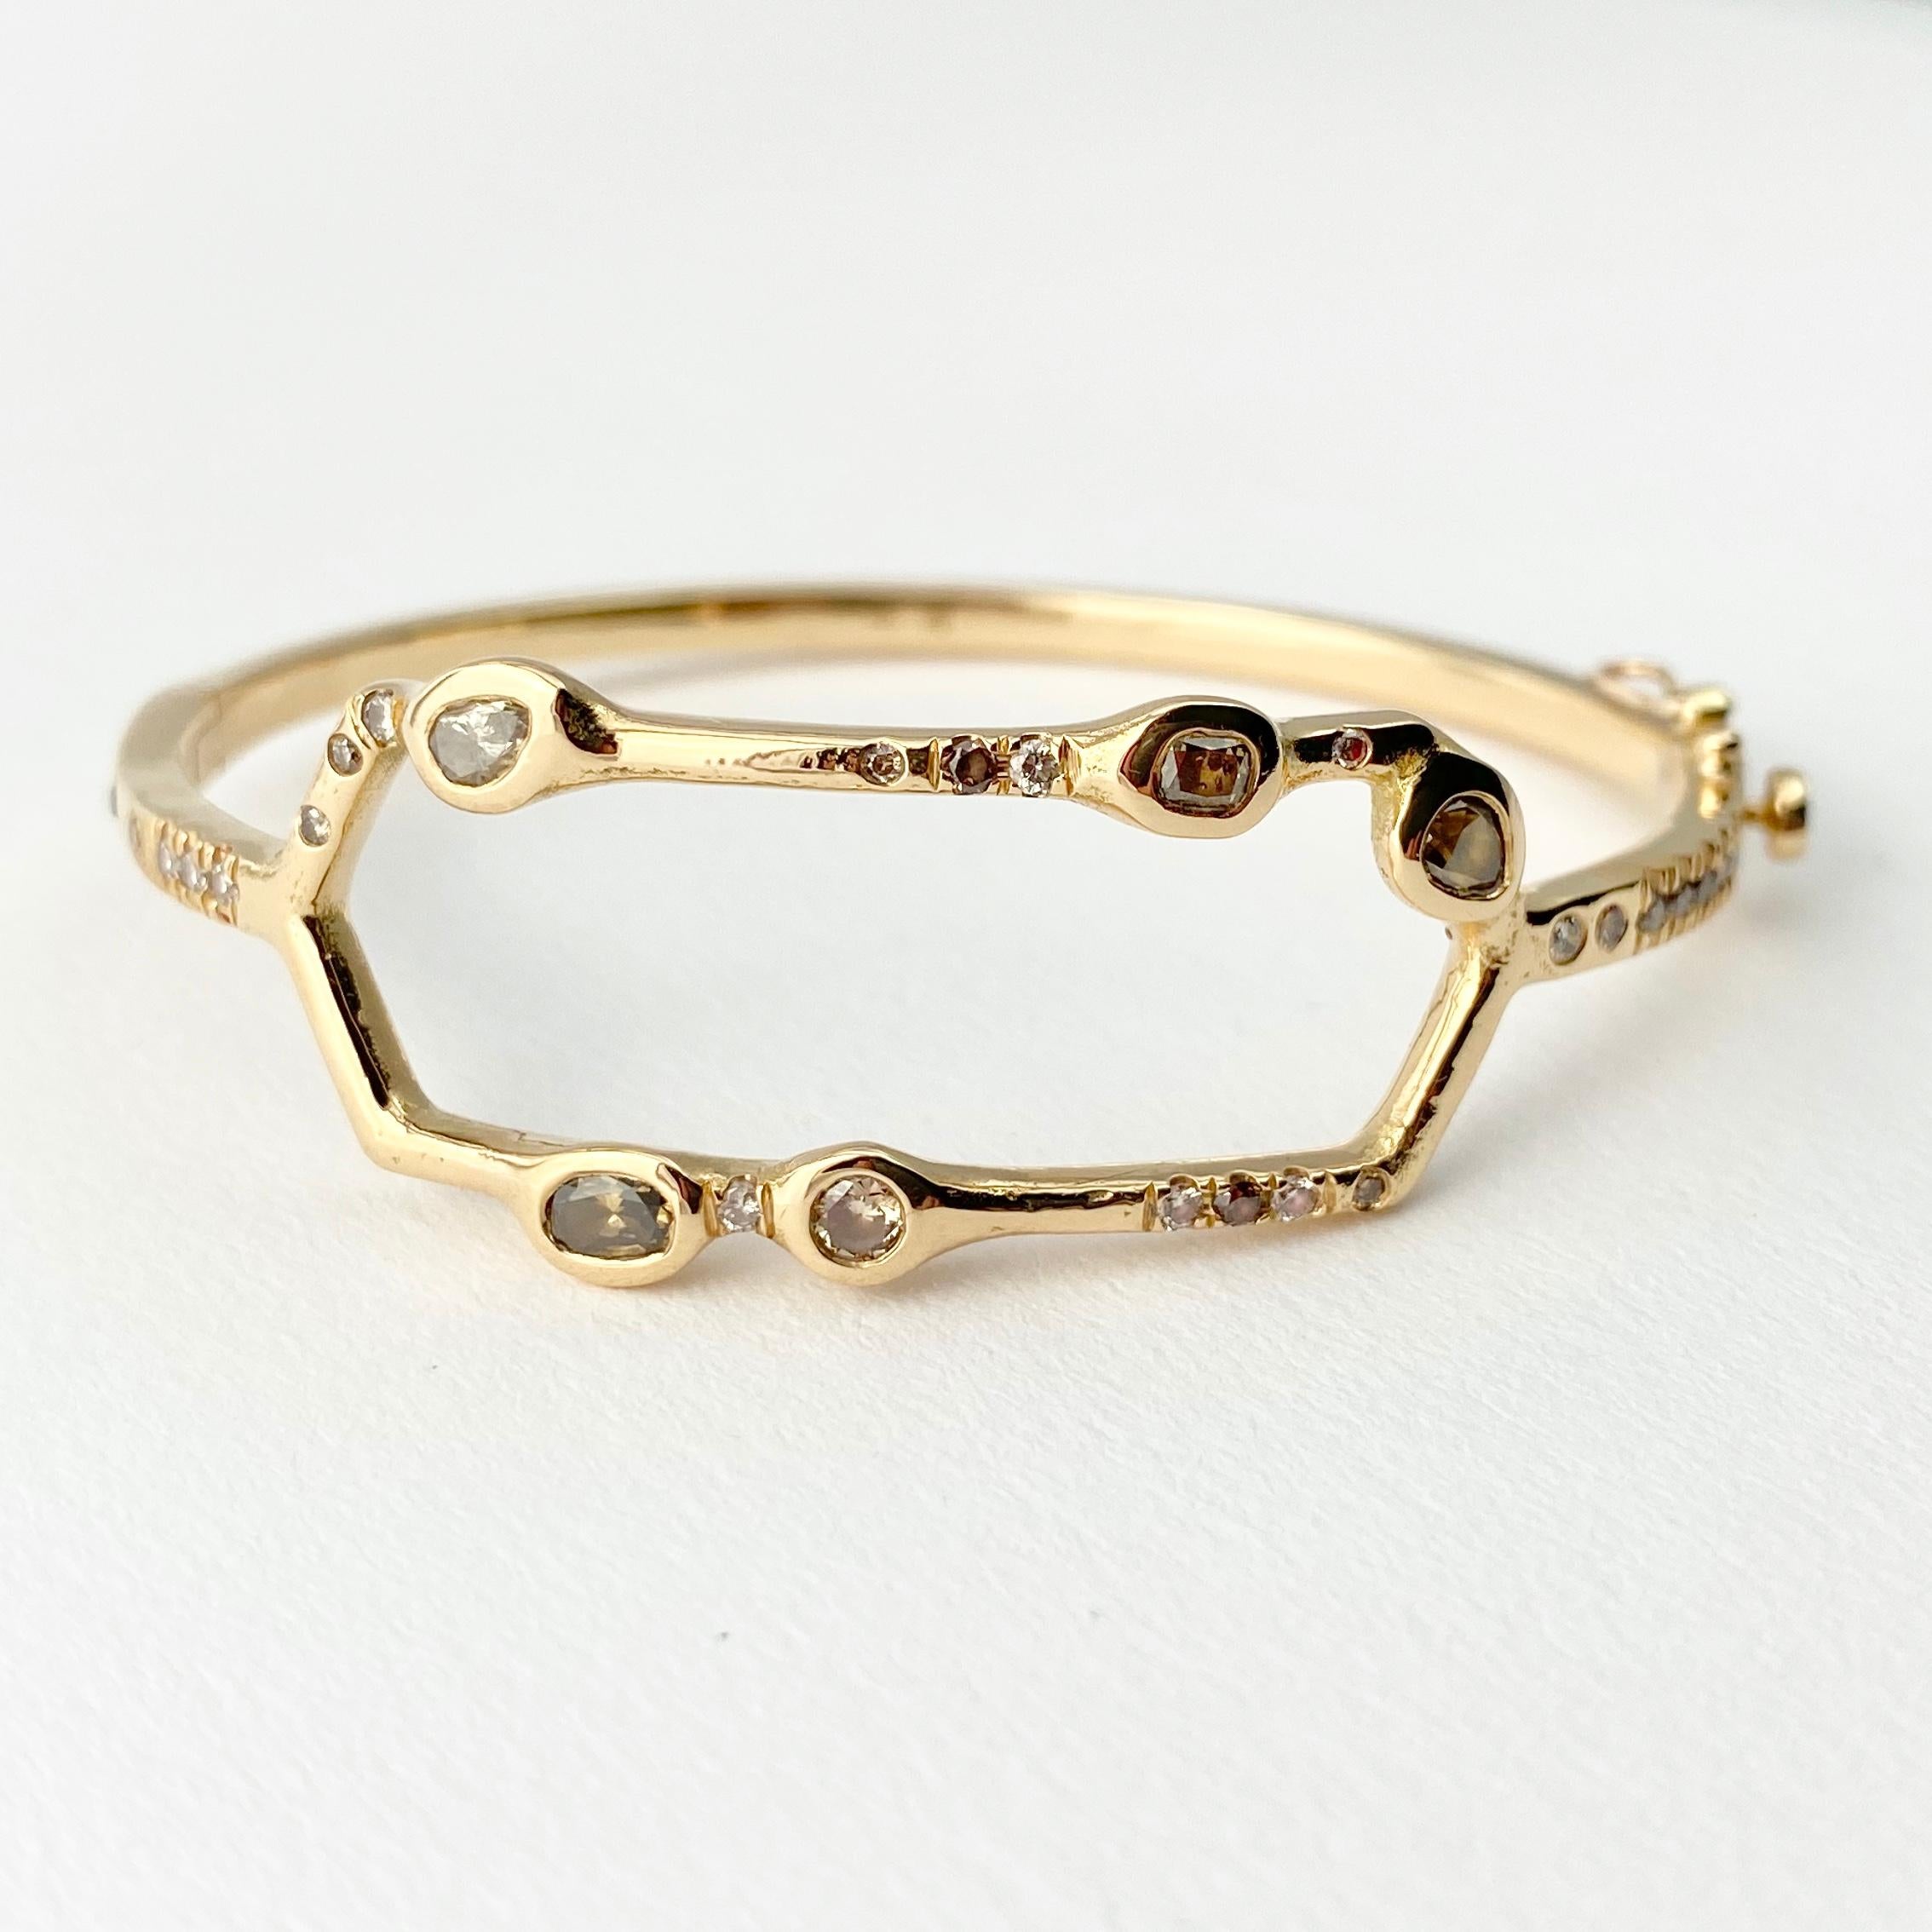 The Debra hinged bangle bracelet is hand-crafted with 18-karat recycled yellow gold, and features five bezel set, colored diamonds (two pear shape, one cushion, one oval, and one round); and 25 round champagne accent diamonds. The hidden box clasp